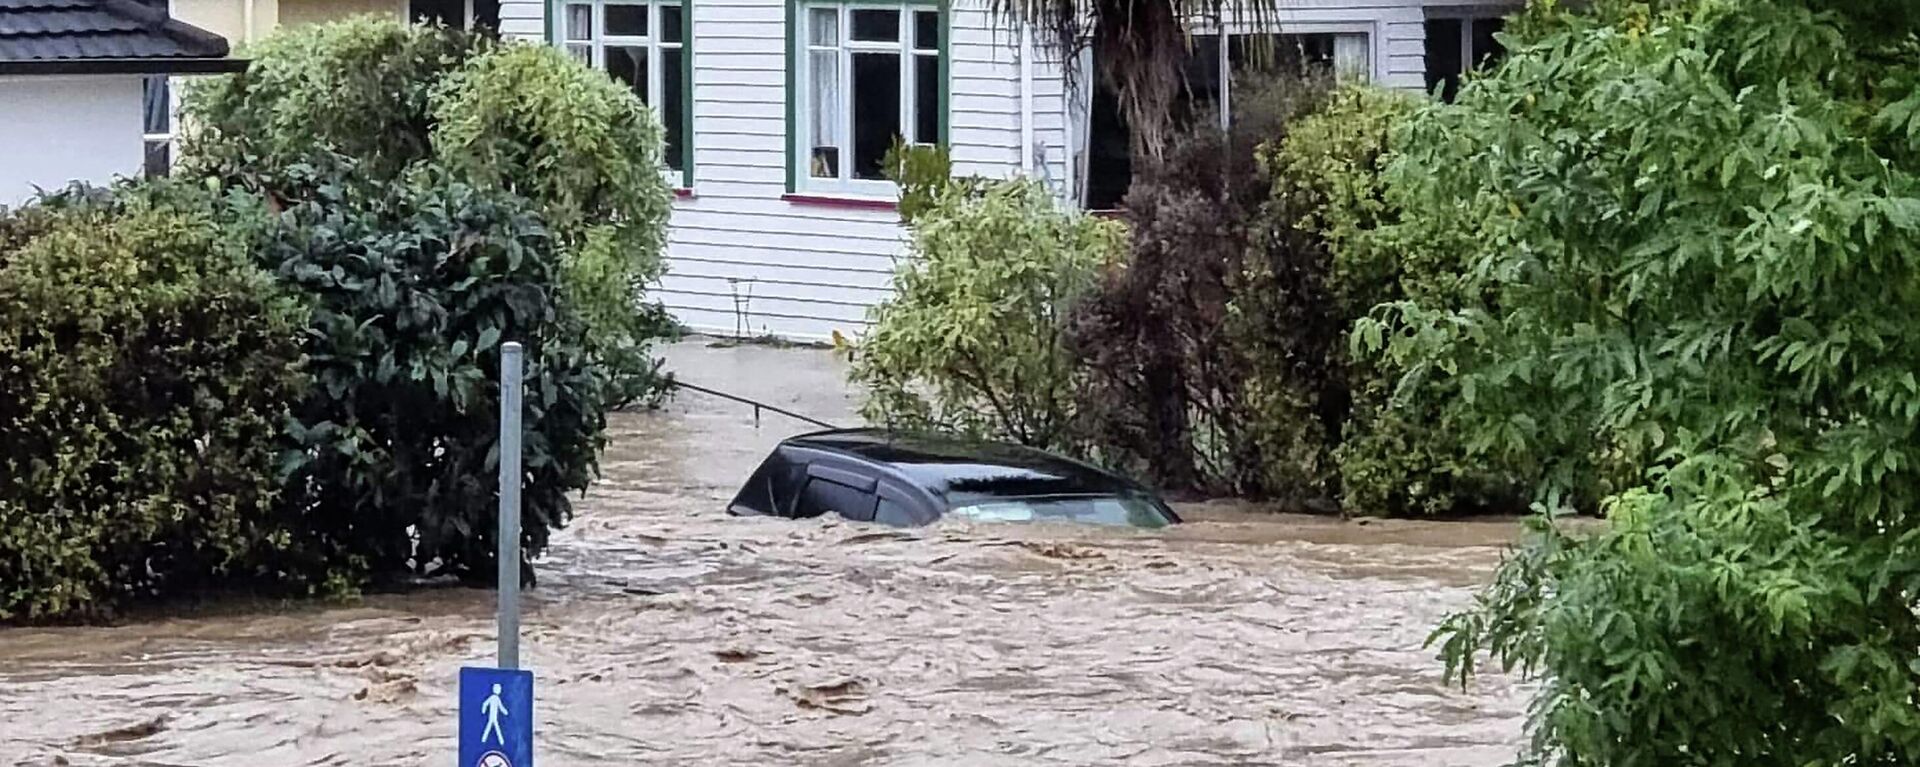 This handout picture taken on August 17, 2022 by local media outlet Andrew App and released on August 18 shows a flood-inundated car and homes from the overflowing Maitai River in central Nelson on New Zealand's South Island - Sputnik International, 1920, 19.08.2022